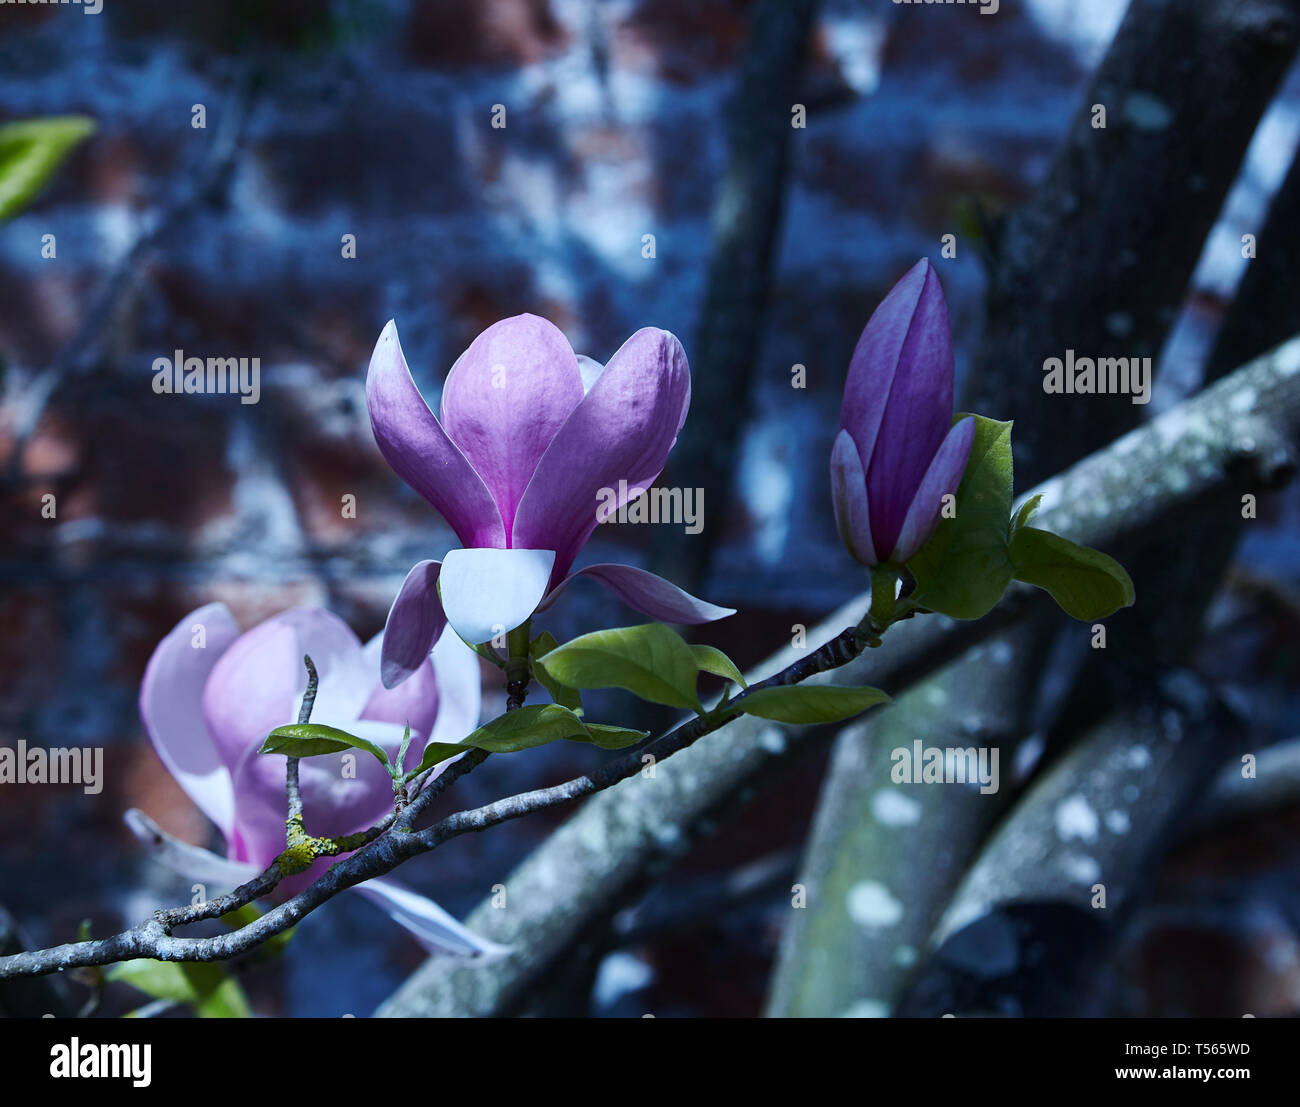 A purple Magnolia flower on a tree against a wall Stock Photo